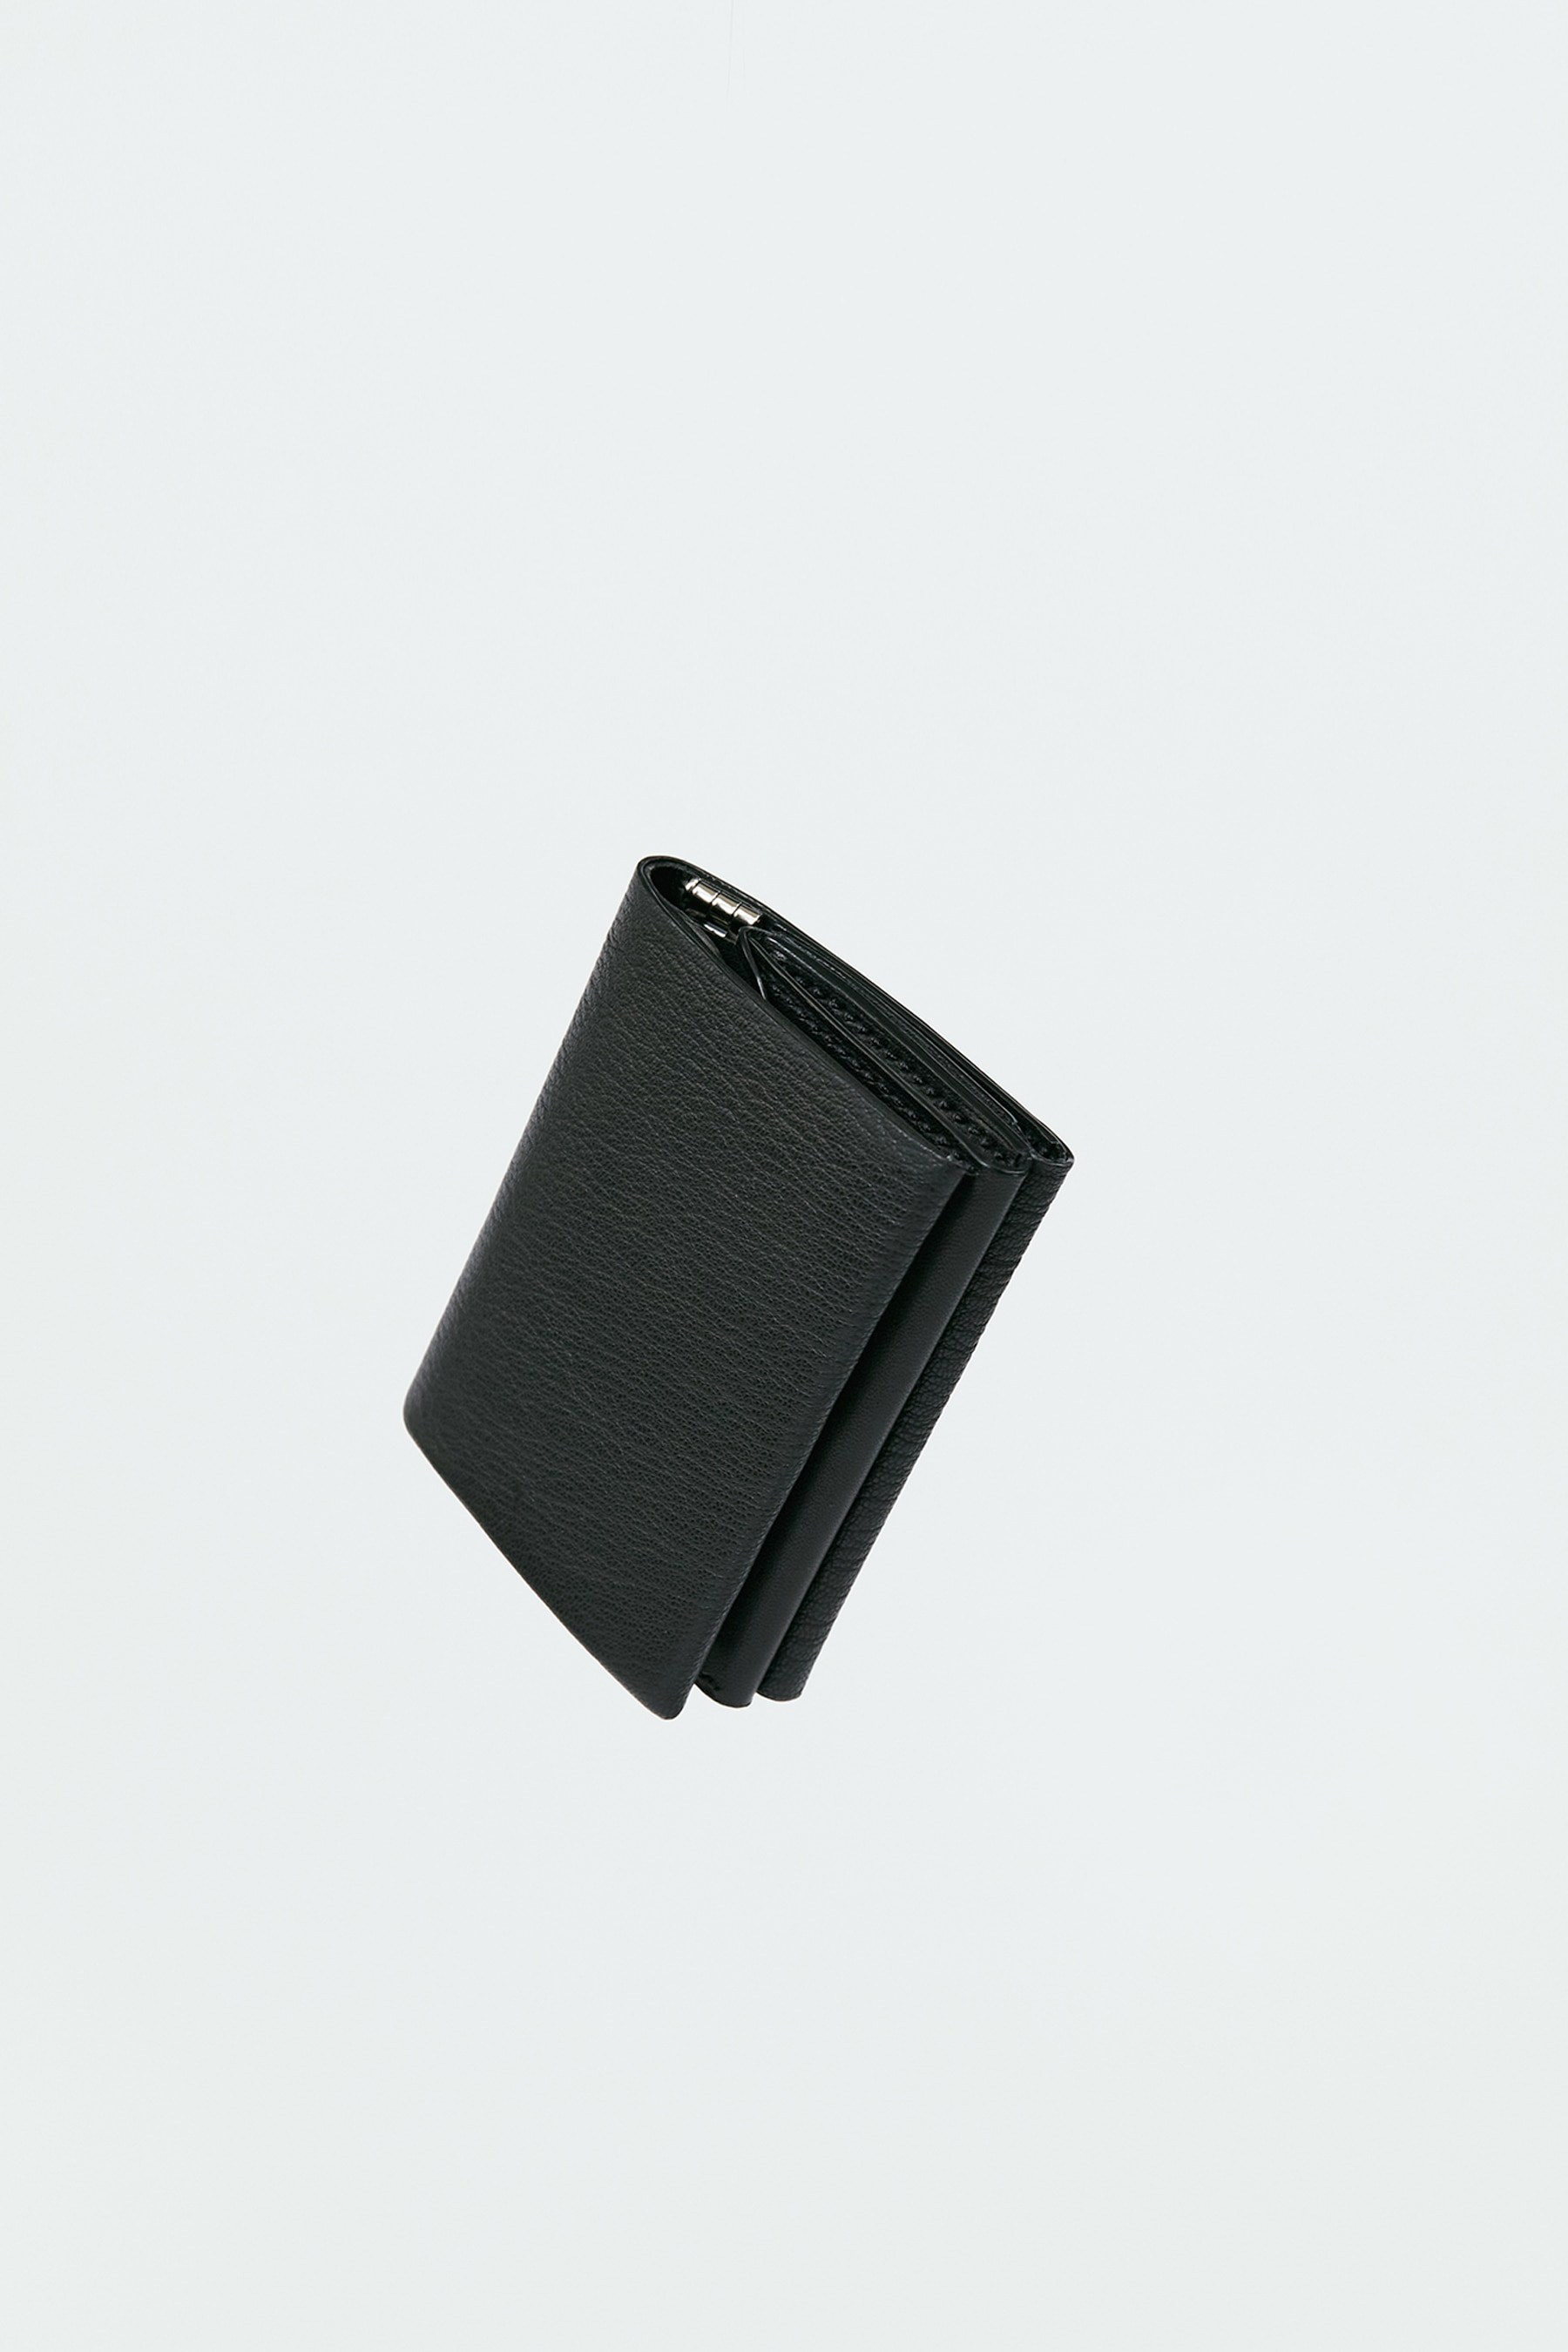 THIN - TRIFOLD WALLET 57 BLACK